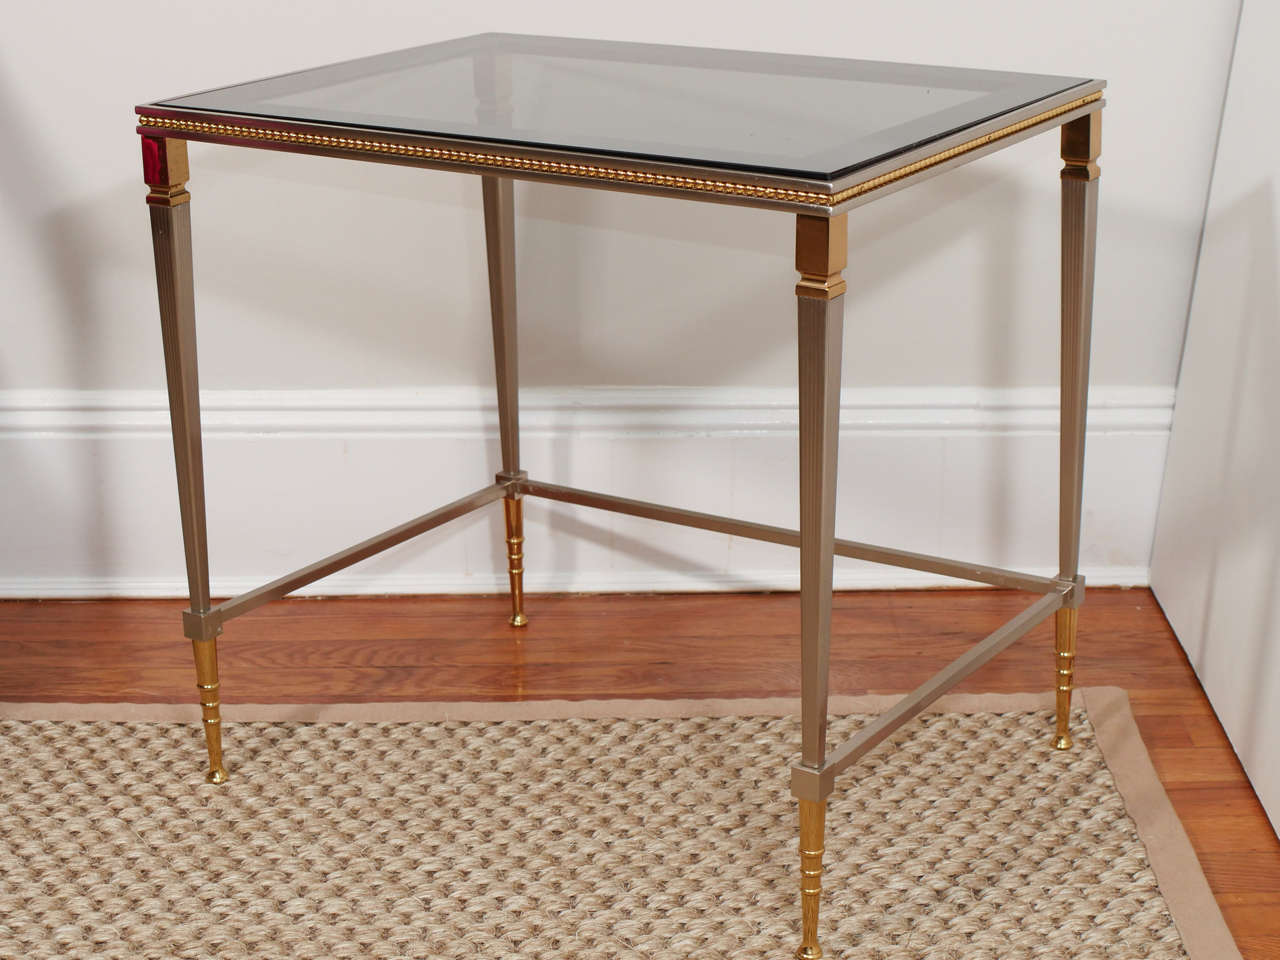 A set of three Jansen style nesting tables in brass and nickel with tinted glass tops.